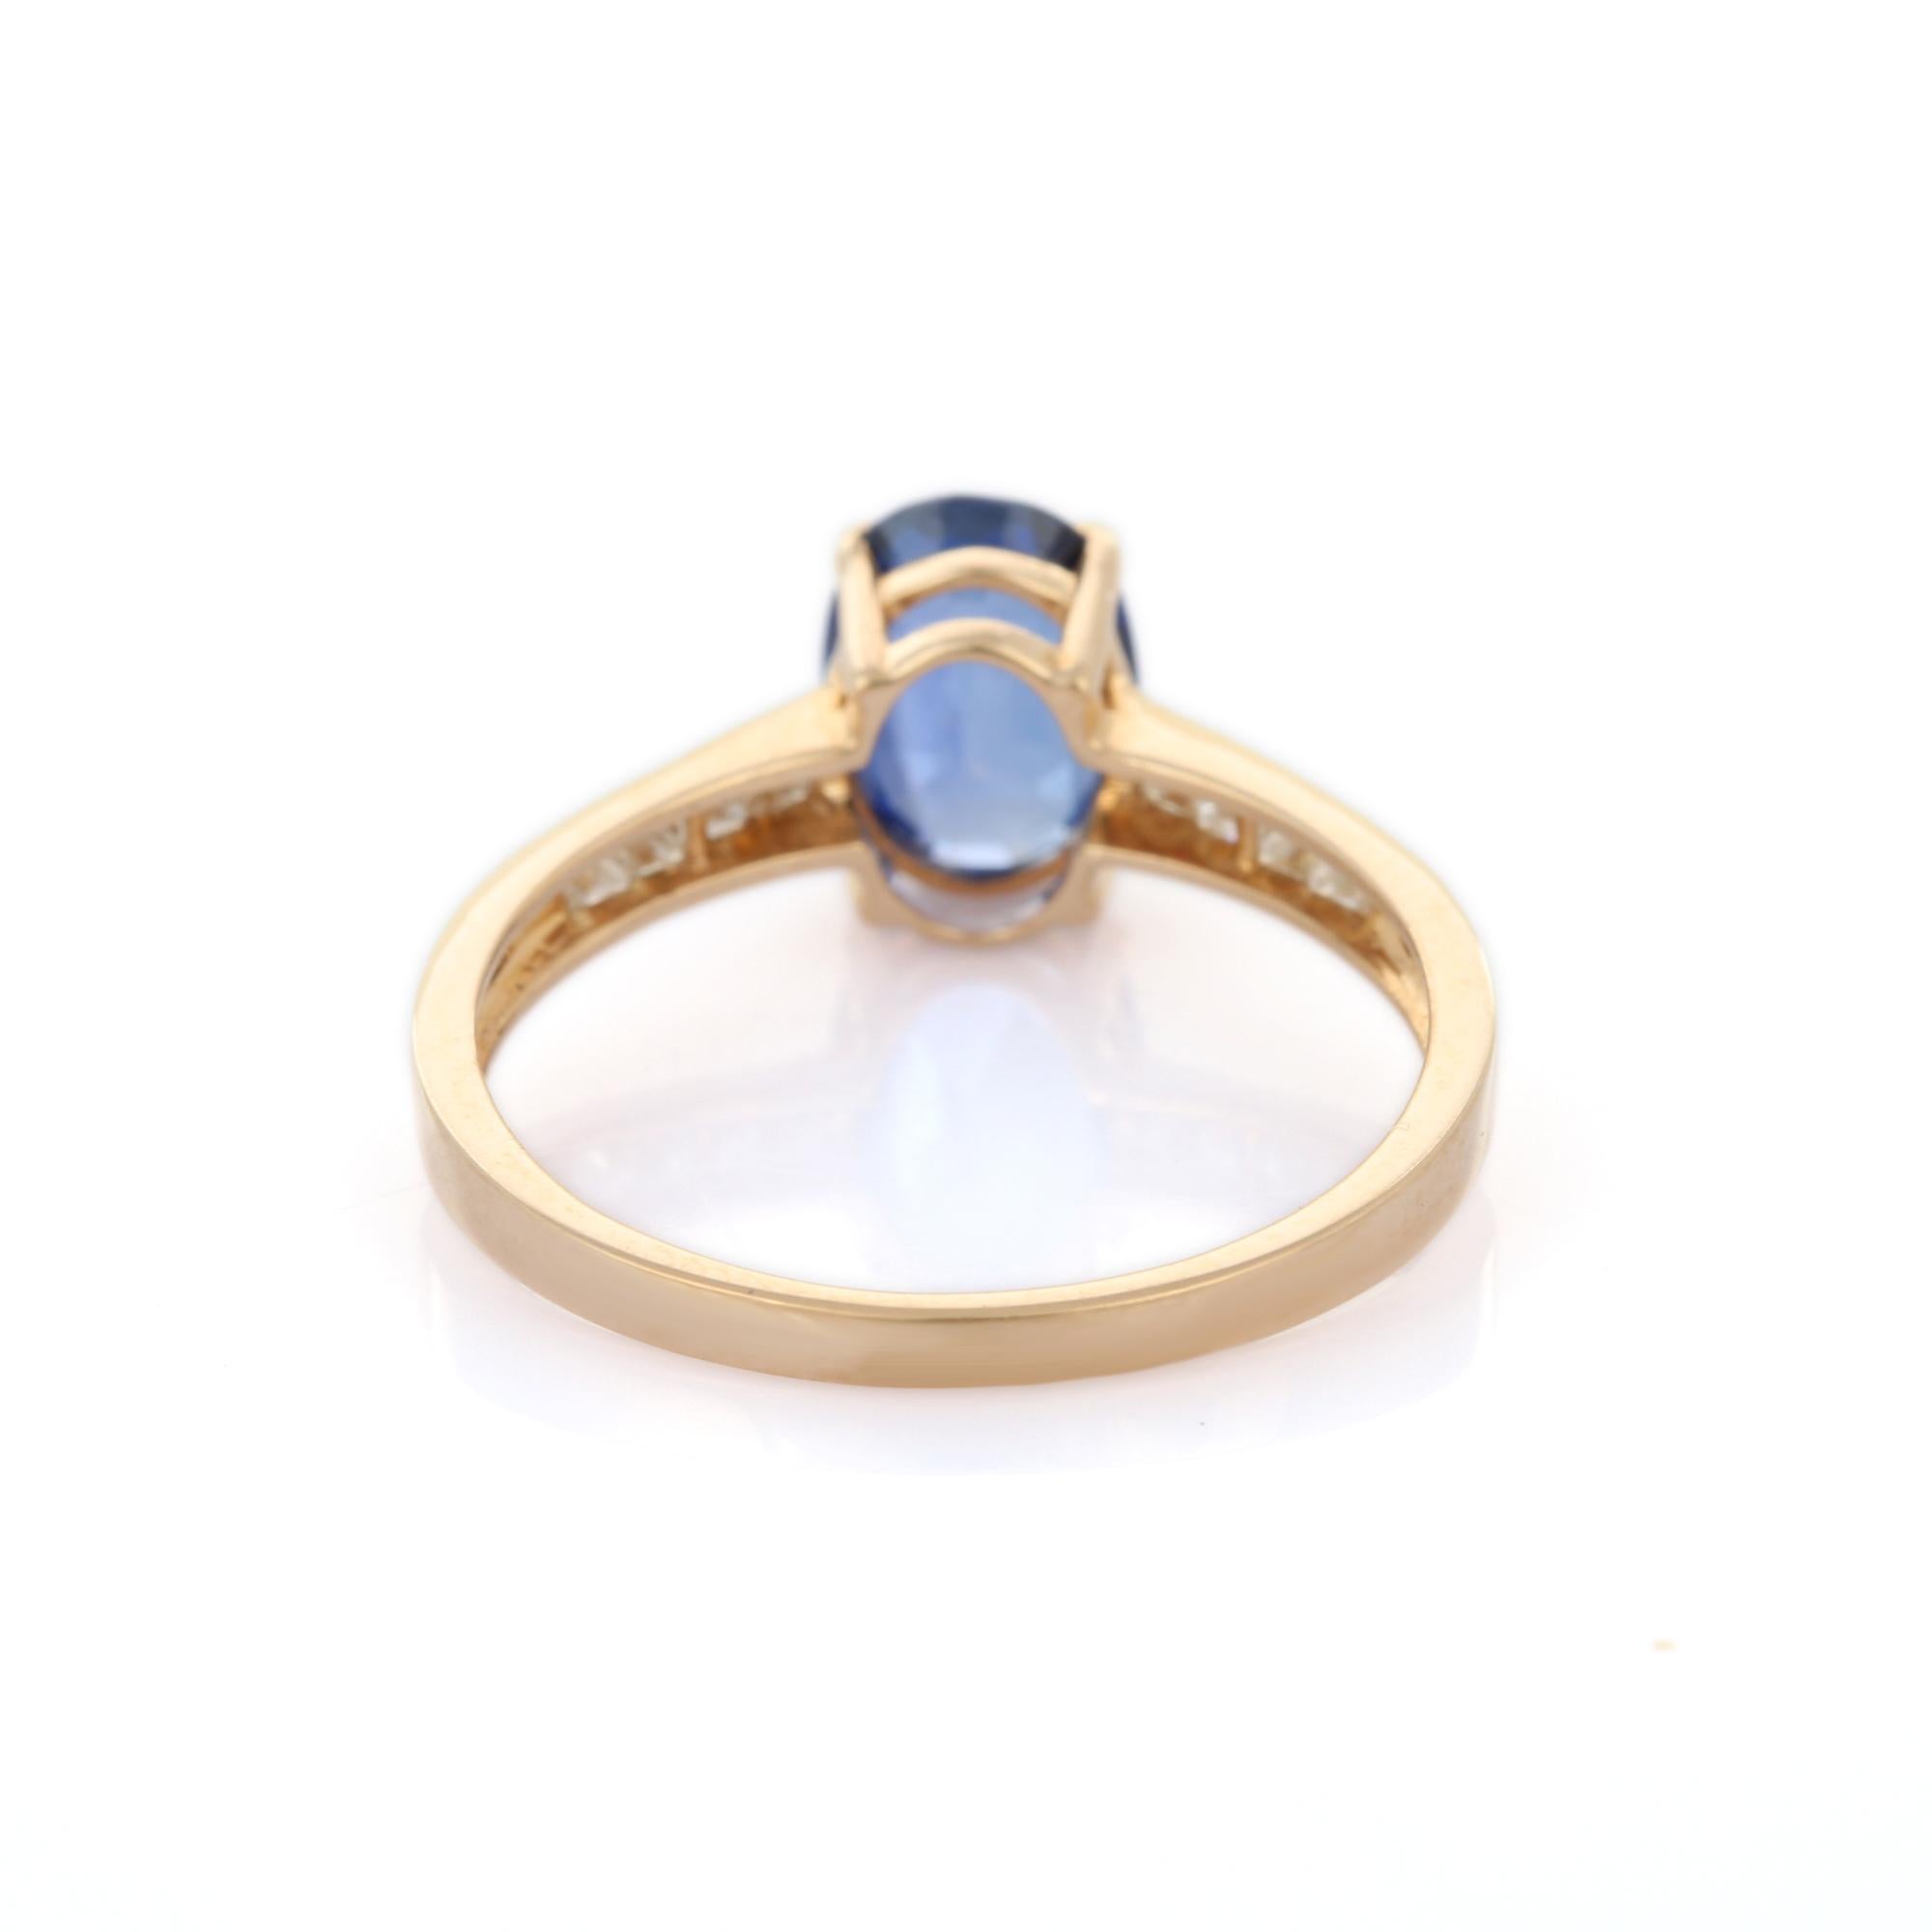 For Sale:  Solitaire Oval Blue Sapphire Diamond Engagement Ring in 14k Solid Yellow Gold 4